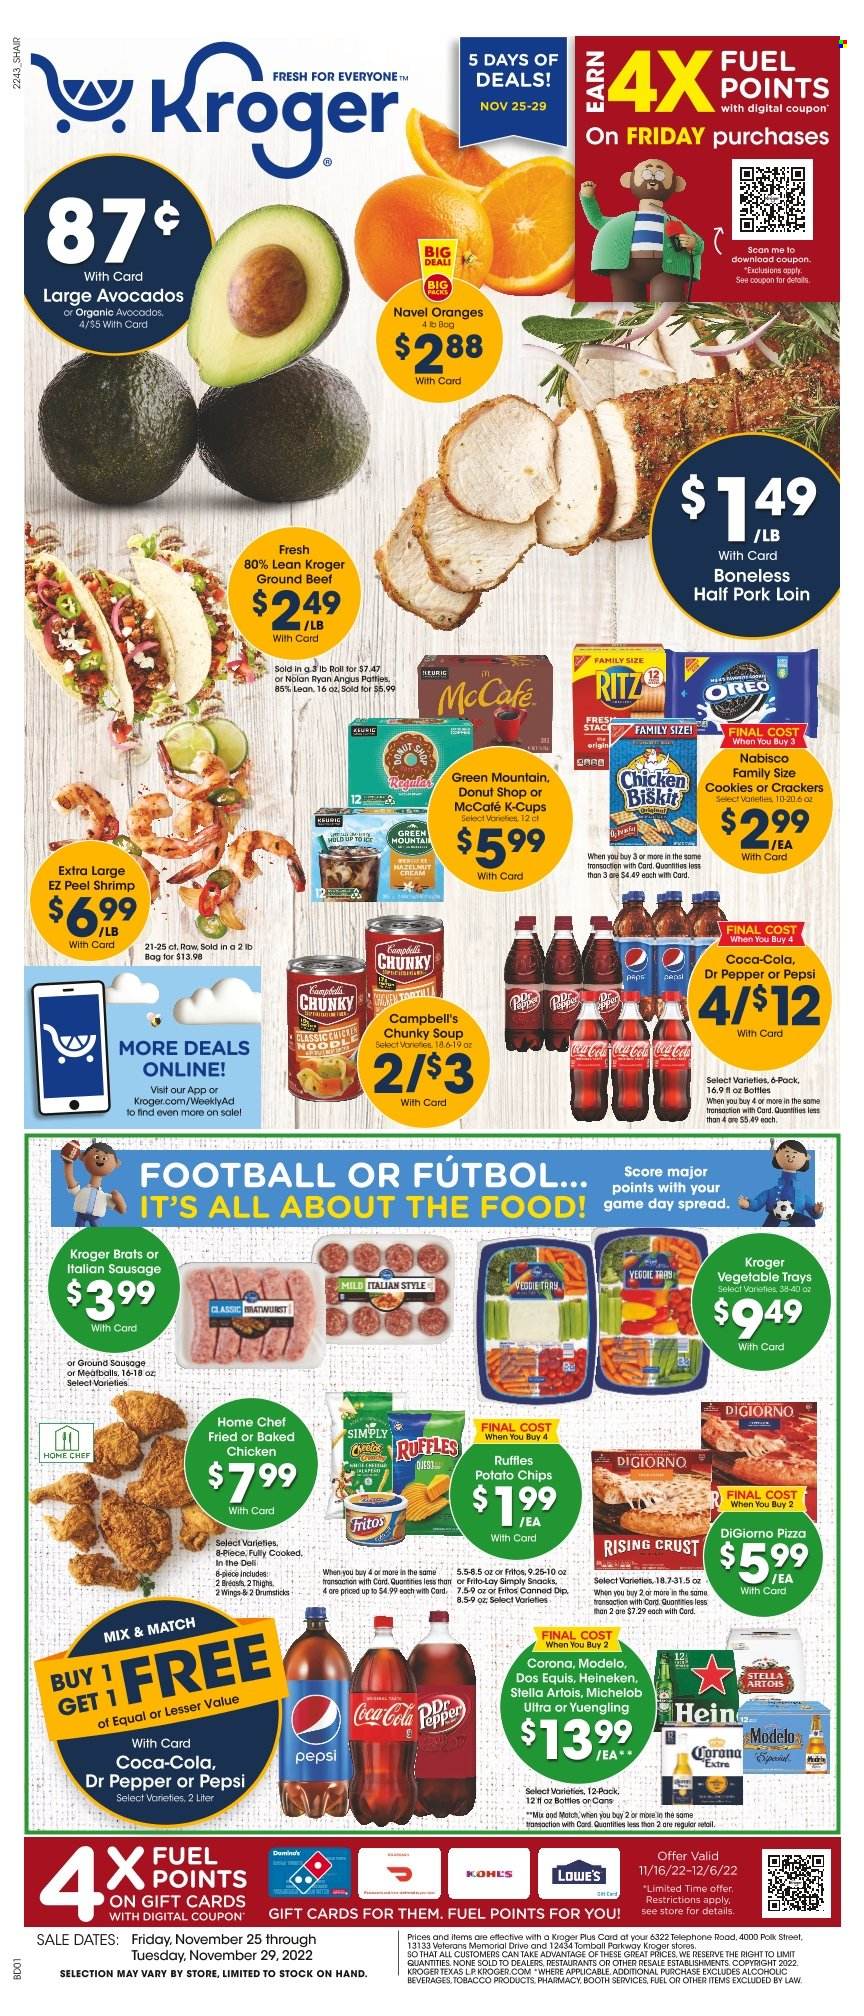 Kroger Flyer - 11/25/2022 - 11/29/2022 - Sales products - tortillas, avocado, orange, shrimps, Campbell's, pizza, meatballs, soup, bratwurst, sausage, italian sausage, Oreo, dip, cookies, snack, crackers, RITZ, Fritos, potato chips, Cheetos, chips, Frito-Lay, Ruffles, Coca-Cola, Pepsi, Dr. Pepper, coffee capsules, McCafe, K-Cups, Keurig, Green Mountain, beer, Corona, Heineken, Modelo, beef meat, ground beef, pork loin, pork meat, Stella Artois, Dos Equis, Yuengling, Michelob, navel oranges. Page 1.